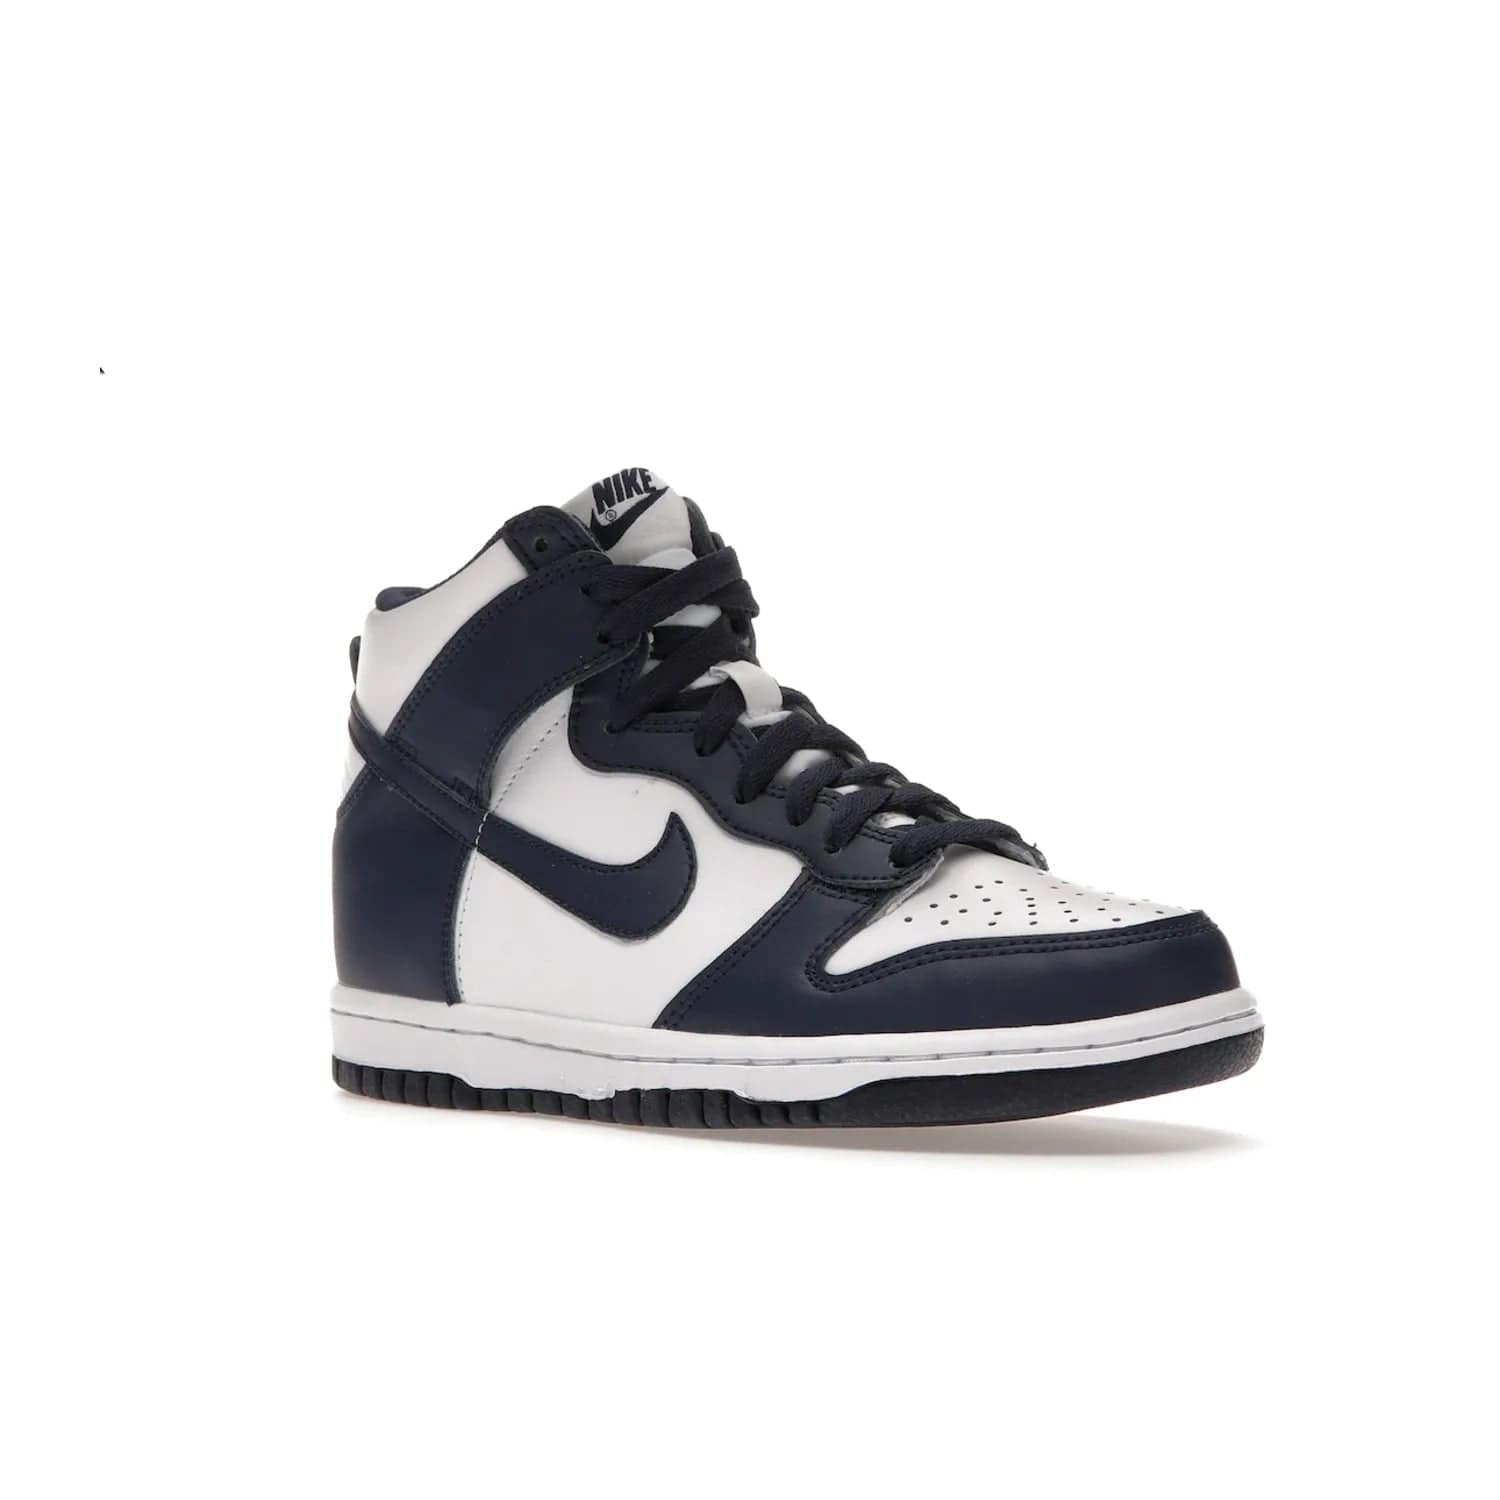 Nike Dunk High Championship Navy (GS) - Image 5 - Only at www.BallersClubKickz.com - Nike Dunk High Championship Navy GS: classic leather, suede, synthetic upper, chunky midsole, rubber herringbone sole. White base overlaid with Midnight Navy for a stylish finish. Padded high-cut collar and signature Nike swoosh design. Step out in these shoes and make a statement. Comfort and style at its finest.